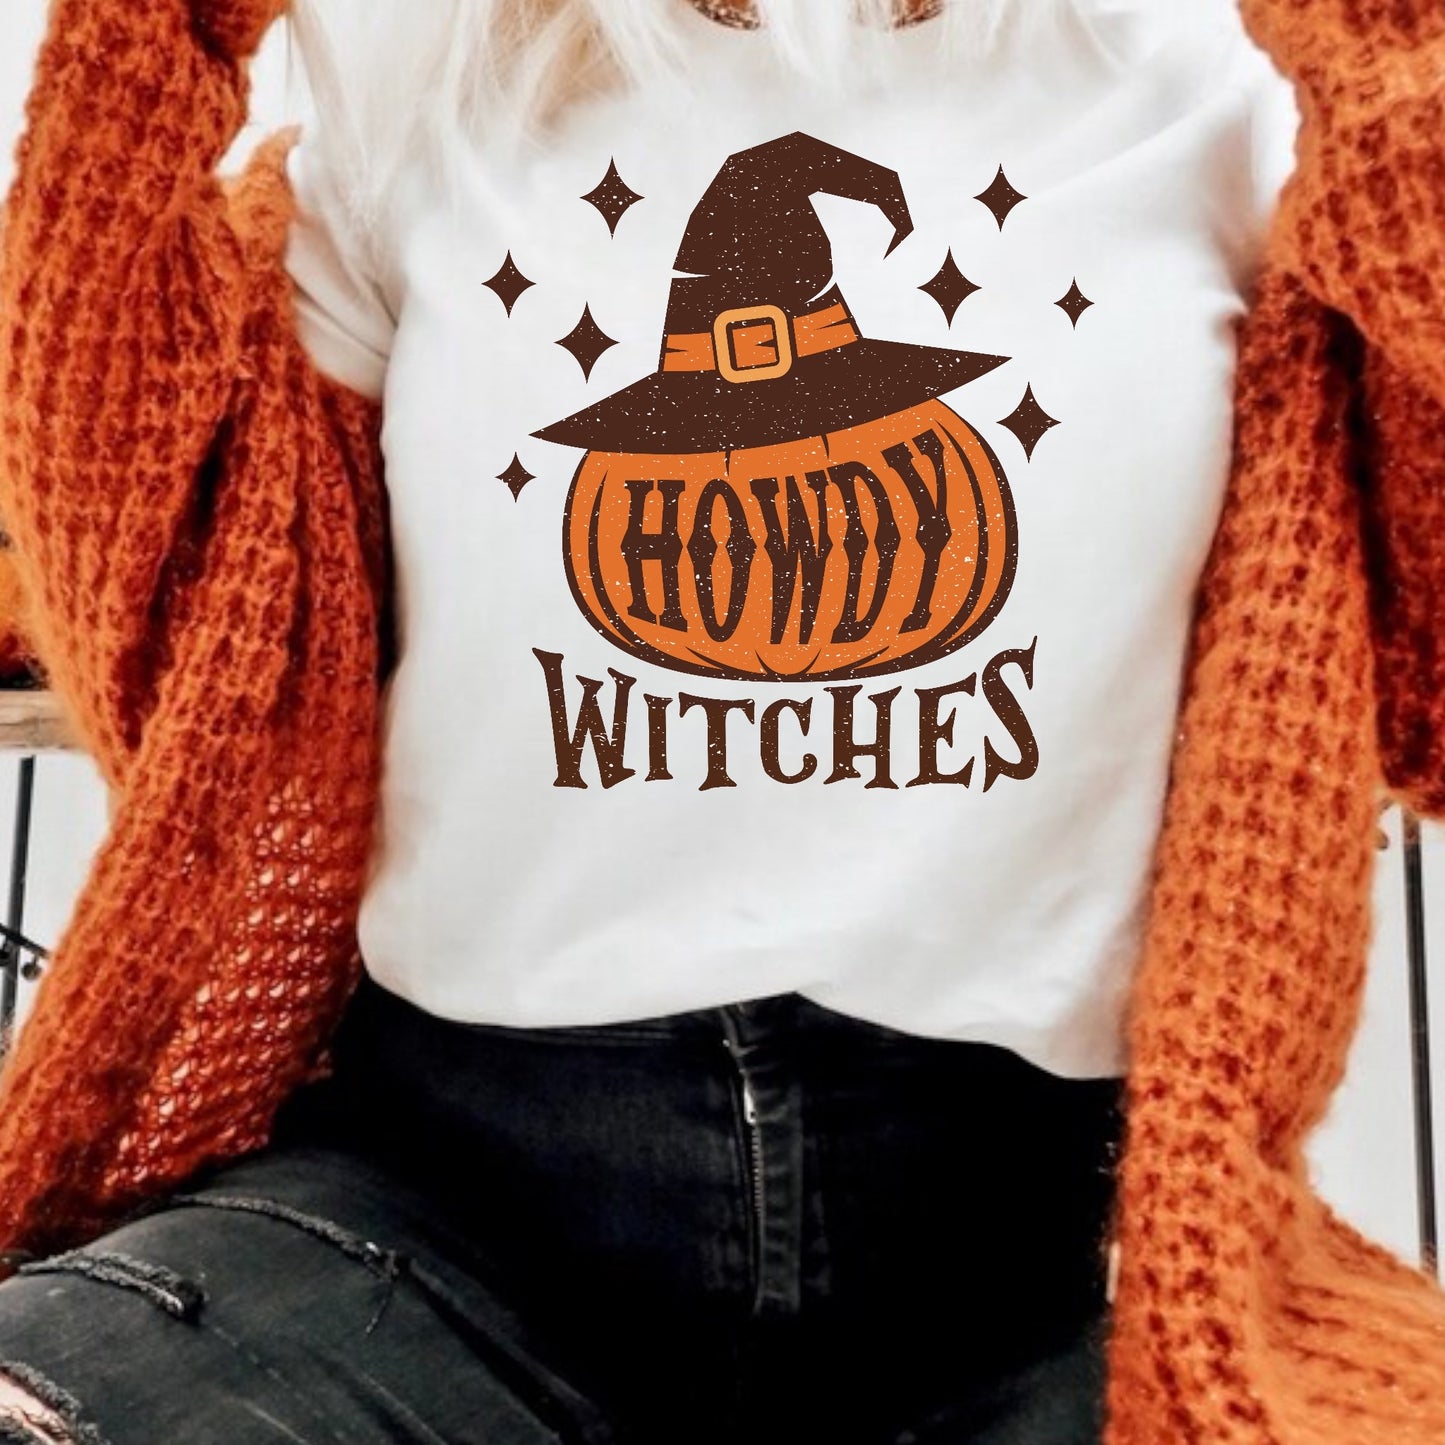 Howdy Witches Tee